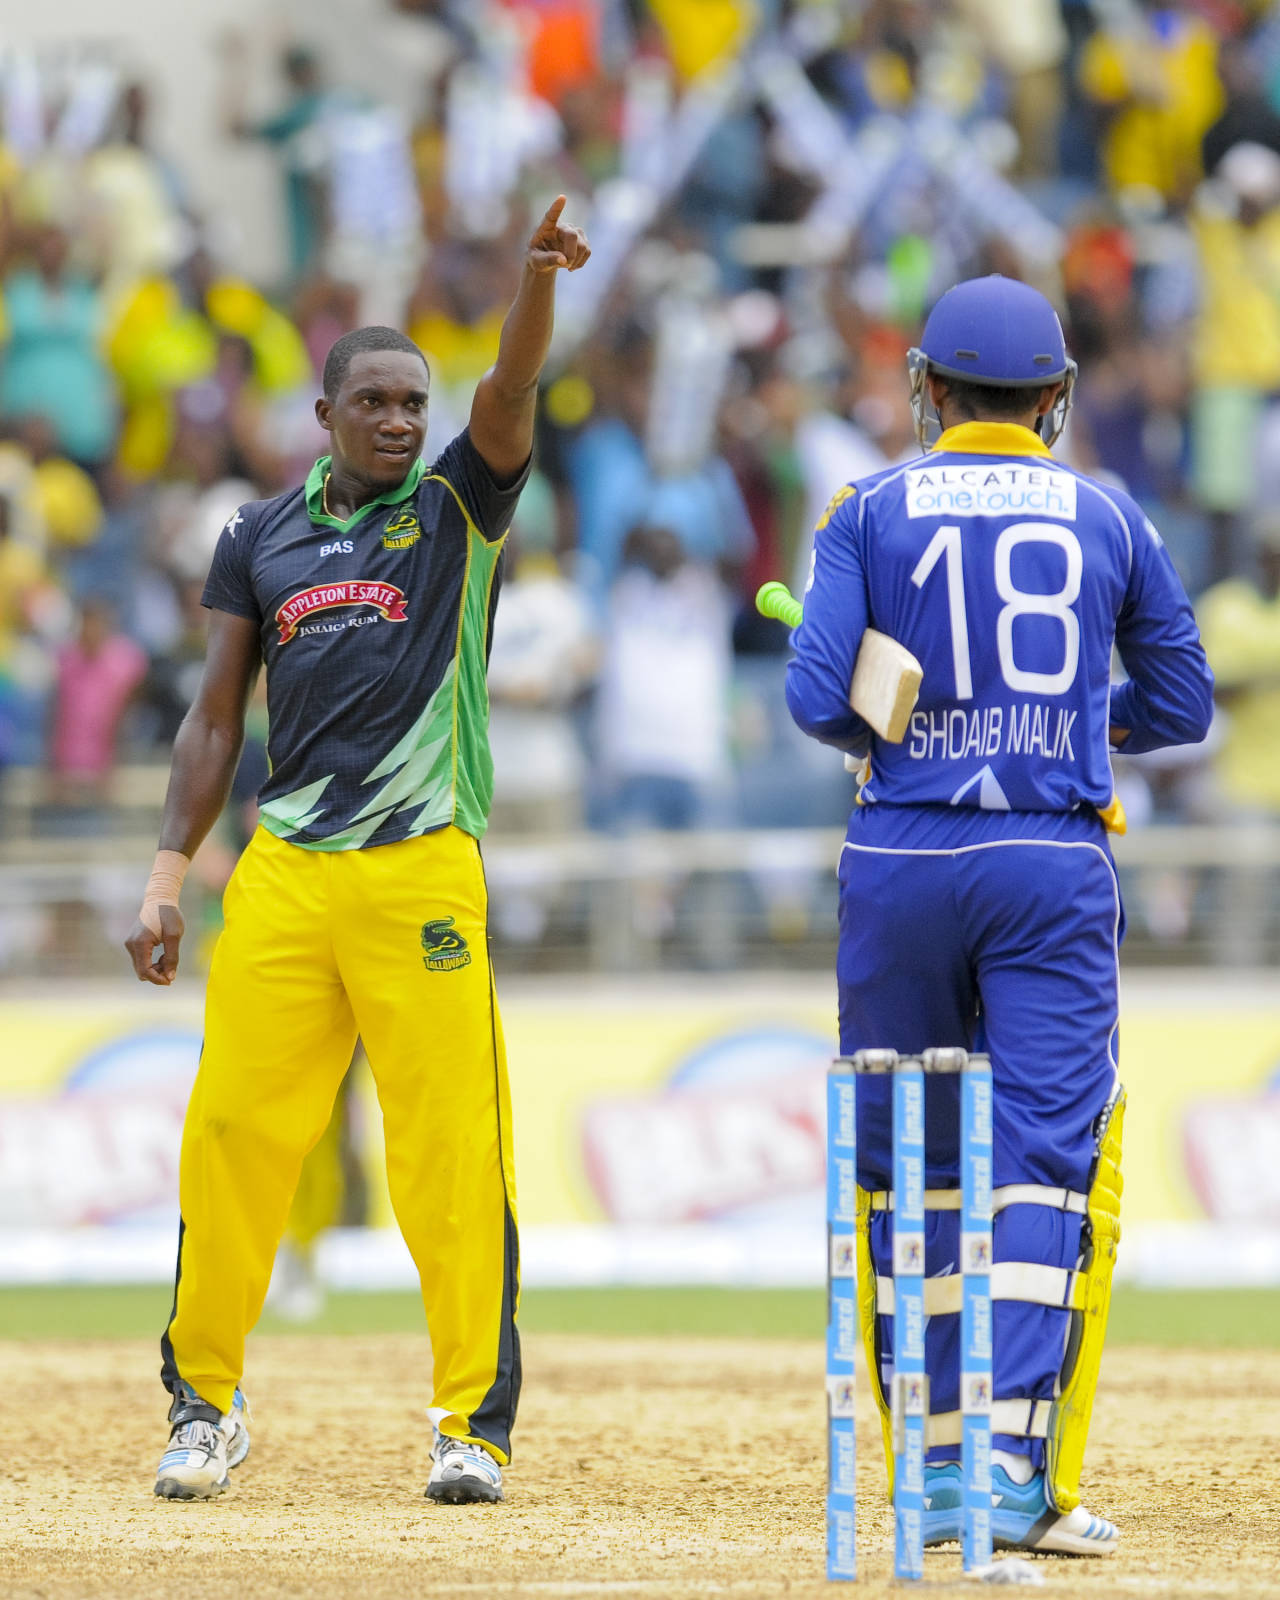 The Tridents found it hard to score on Jerome Taylor in Sabina Park as he finished with figures of 4-0-11-2&nbsp;&nbsp;&bull;&nbsp;&nbsp;LatinContent/Getty Images